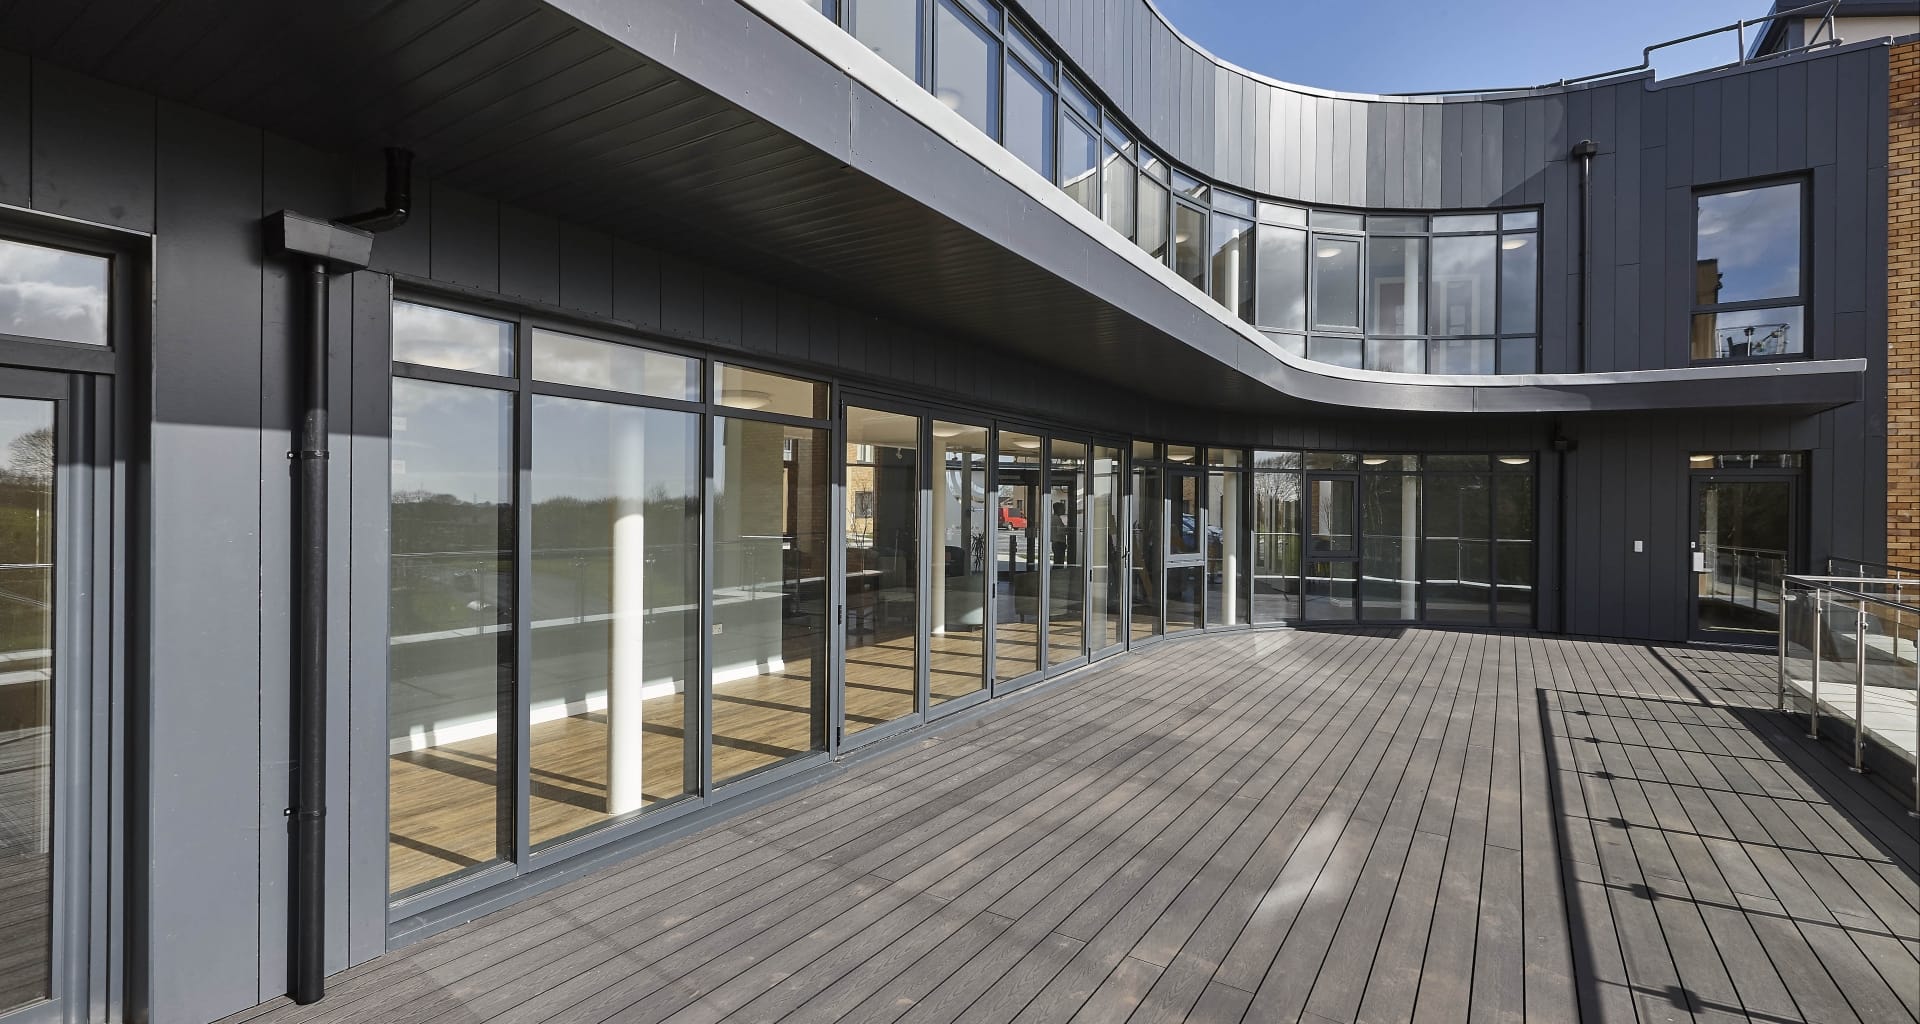 AluK Shows its Strength with Faceted on Plan Curtain Walling Solution